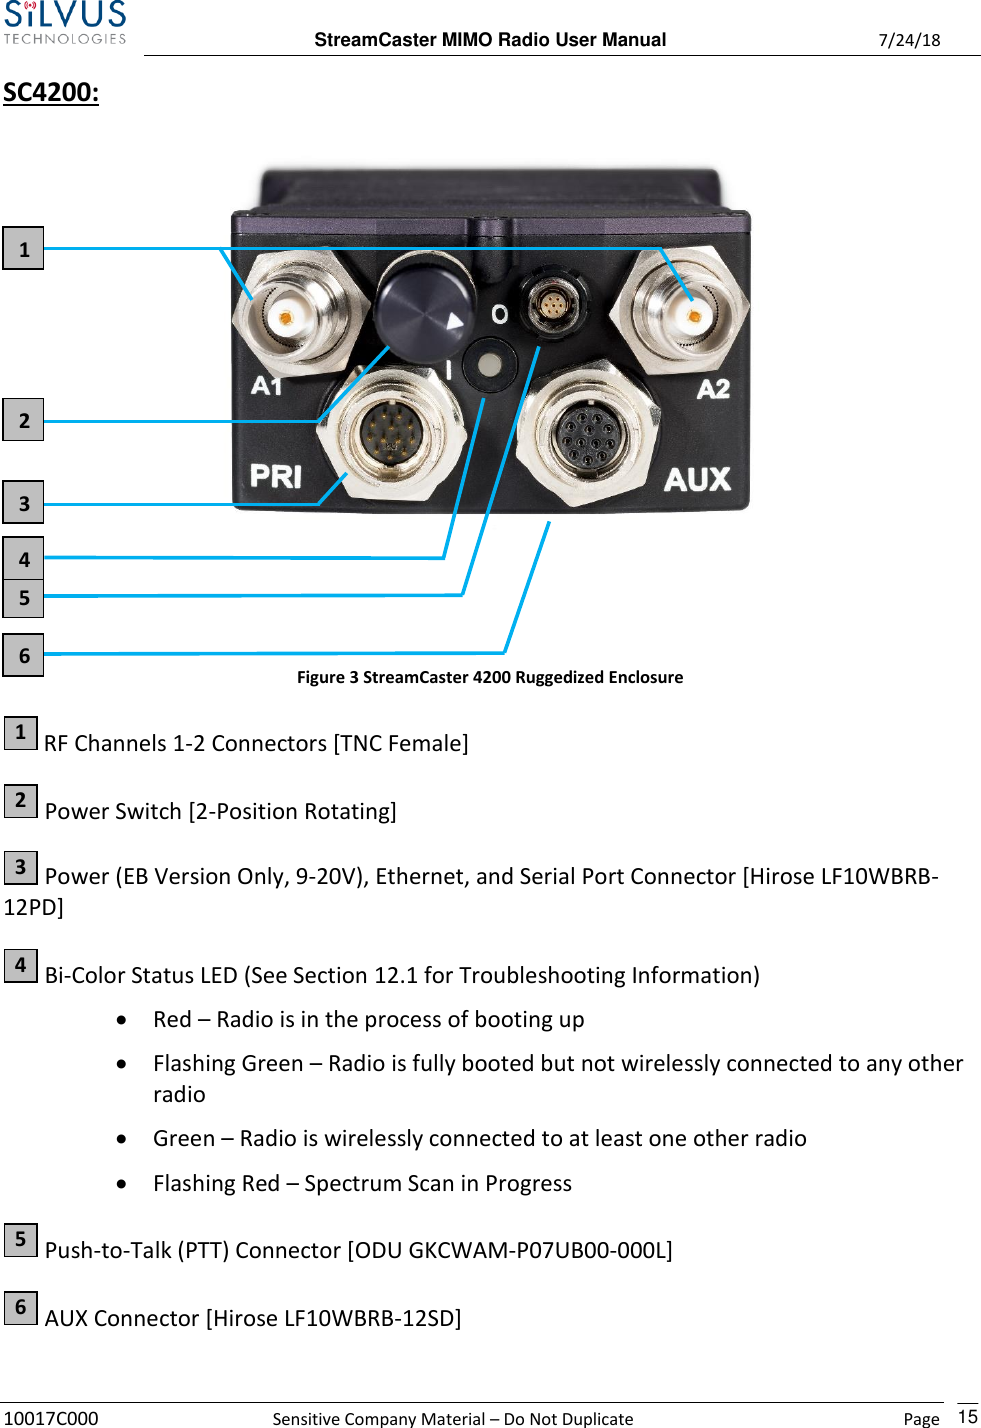  StreamCaster MIMO Radio User Manual  7/24/18 10017C000  Sensitive Company Material – Do Not Duplicate    Page    15 SC4200:     Figure 3 StreamCaster 4200 Ruggedized Enclosure  RF Channels 1-2 Connectors [TNC Female]  Power Switch [2-Position Rotating]  Power (EB Version Only, 9-20V), Ethernet, and Serial Port Connector [Hirose LF10WBRB-12PD]  Bi-Color Status LED (See Section 12.1 for Troubleshooting Information) • Red – Radio is in the process of booting up • Flashing Green – Radio is fully booted but not wirelessly connected to any other radio • Green – Radio is wirelessly connected to at least one other radio • Flashing Red – Spectrum Scan in Progress  Push-to-Talk (PTT) Connector [ODU GKCWAM-P07UB00-000L]  AUX Connector [Hirose LF10WBRB-12SD]  1 2 3 4 5 6 1 3 5 4 6 2 